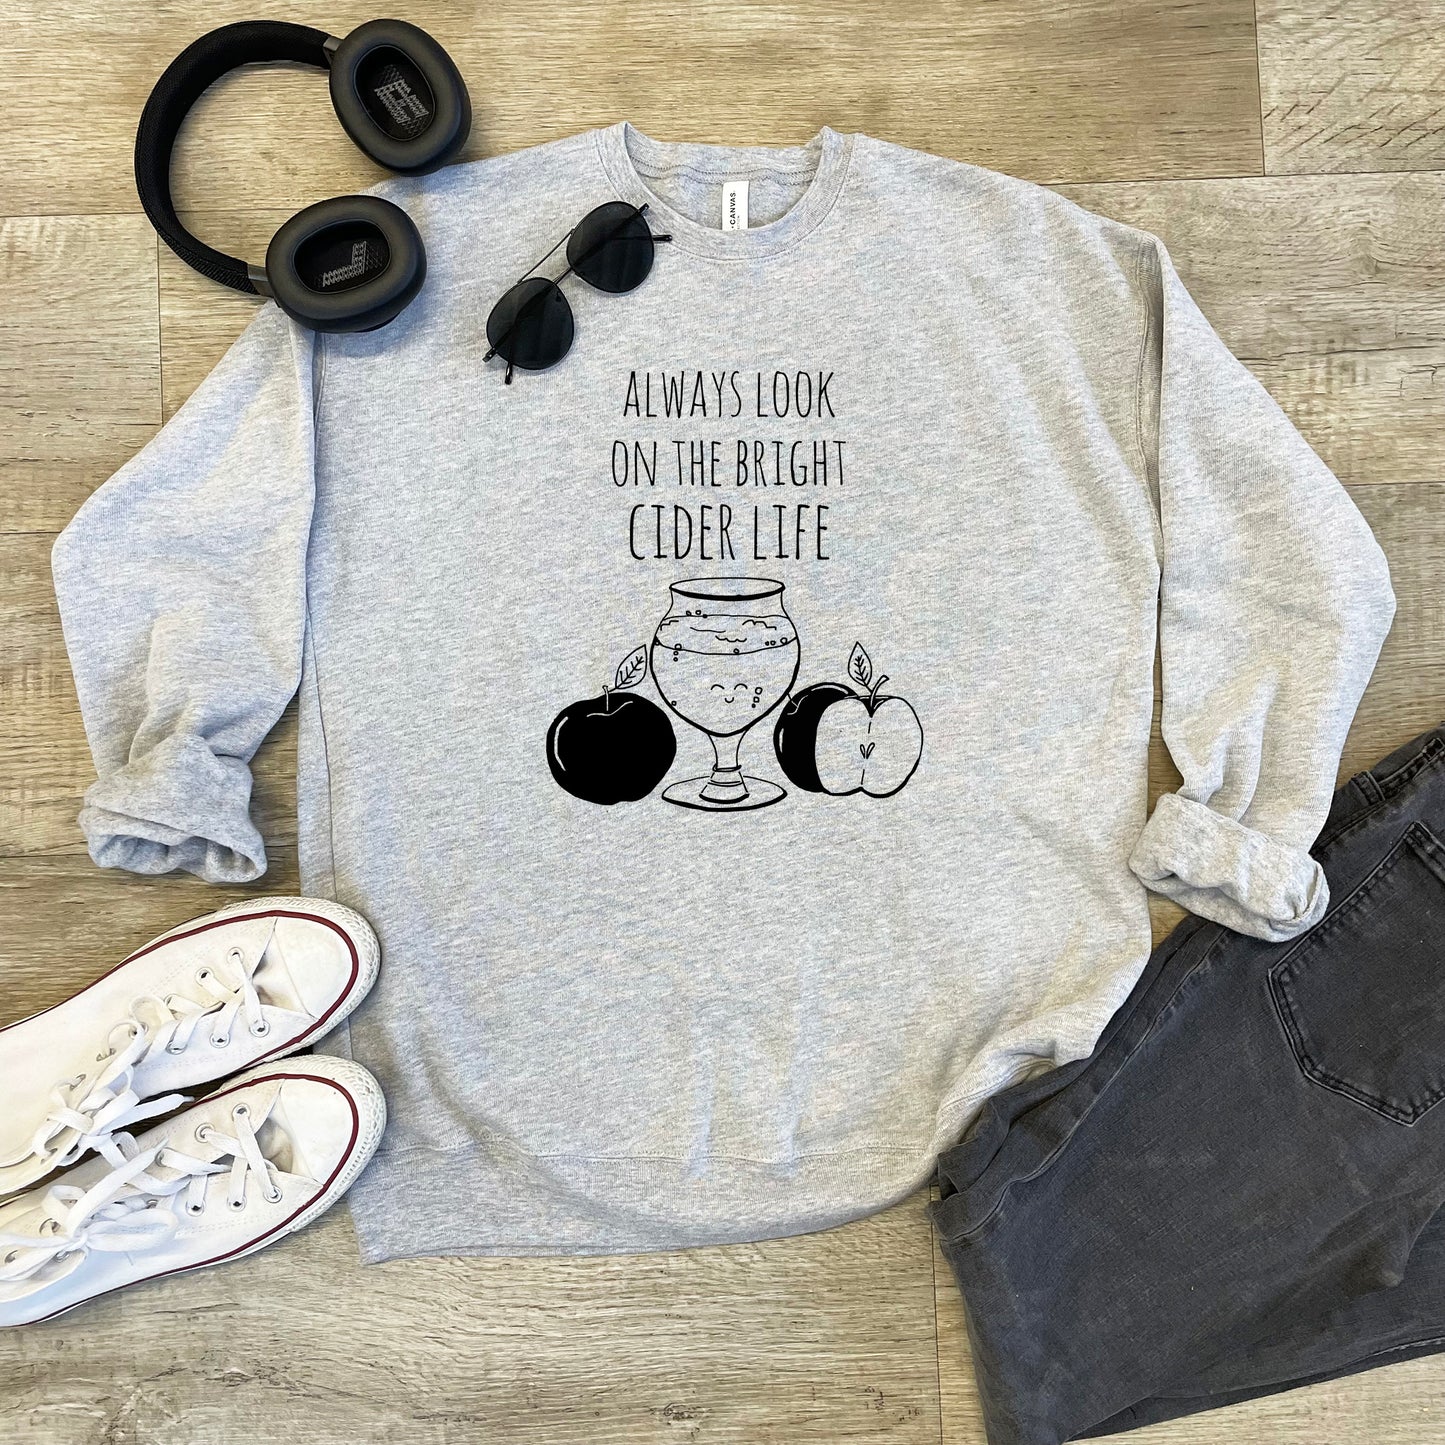 Look On The Bright Cider Life - Unisex Sweatshirt - Heather Gray or Dusty Blue